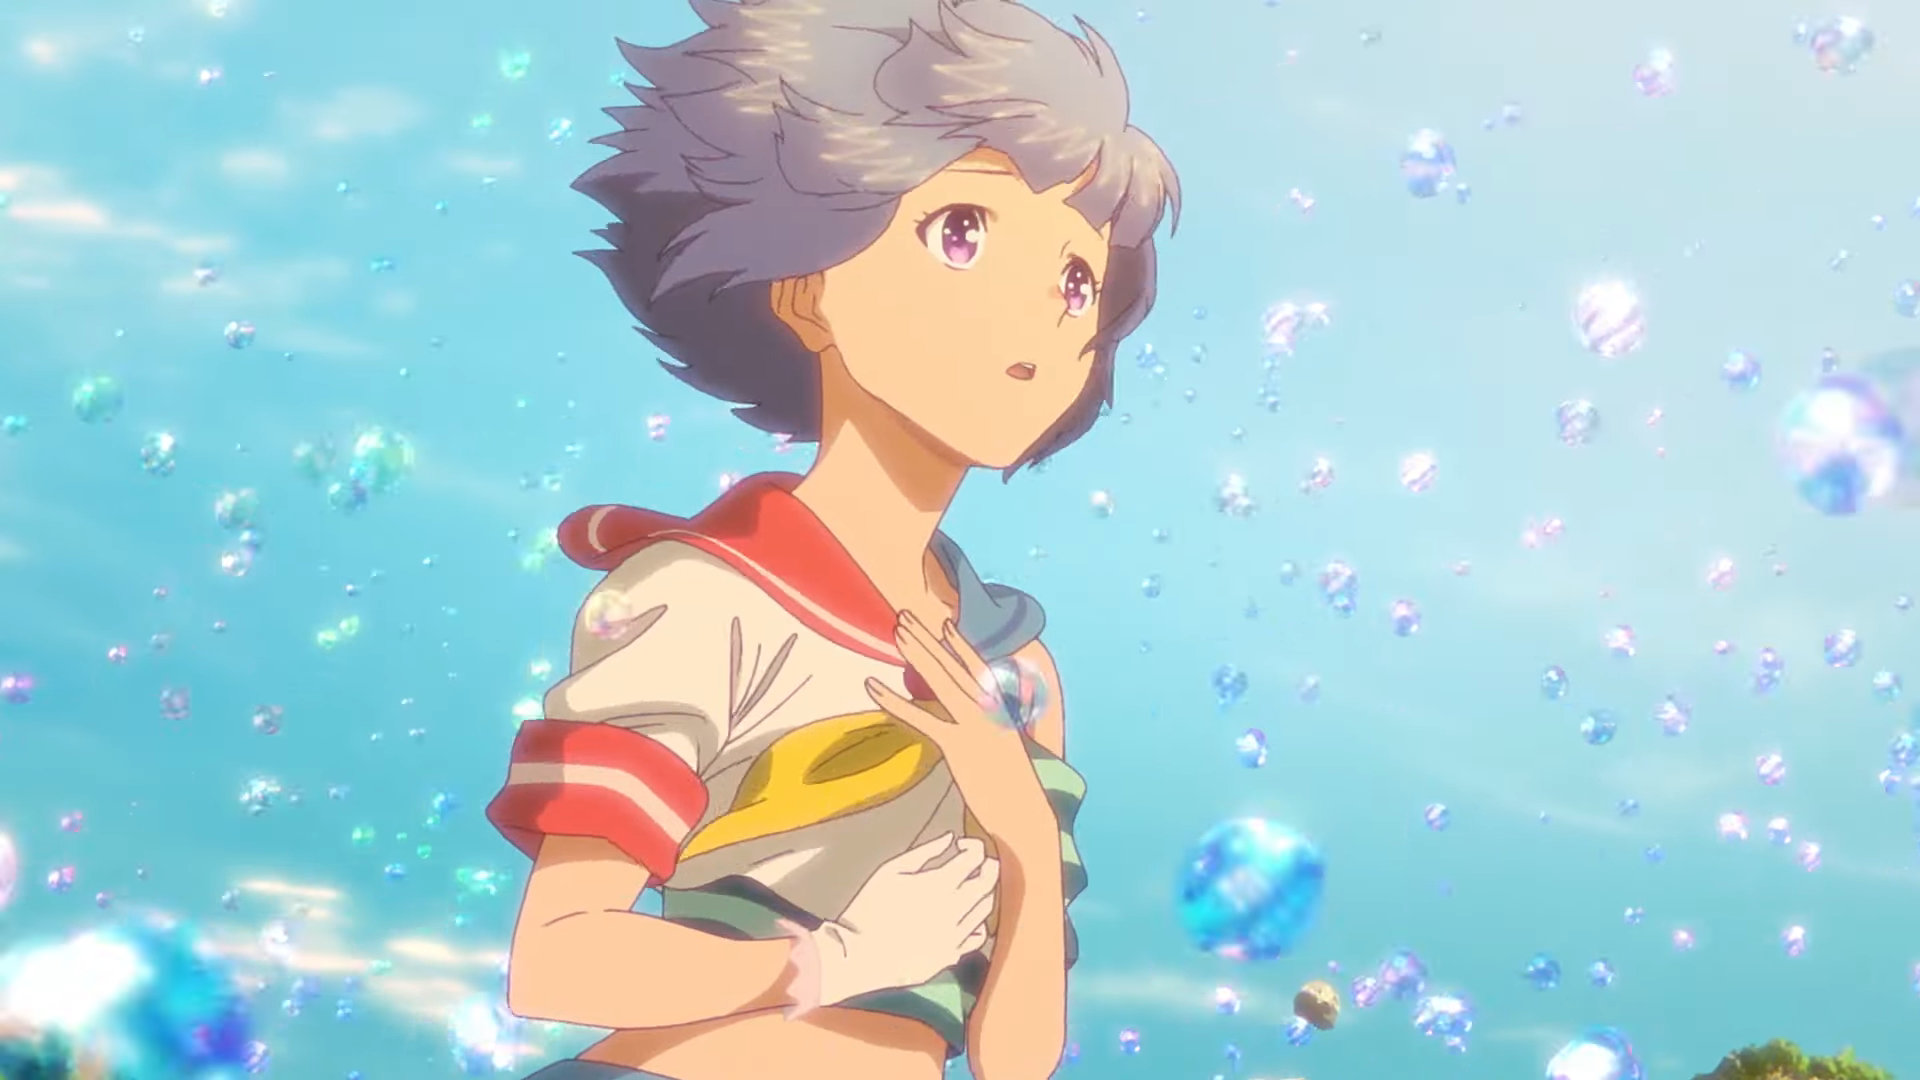 Gravity is Broken: See the Teaser for Netflix Anime Film “Bubble” – Coming  in 2022